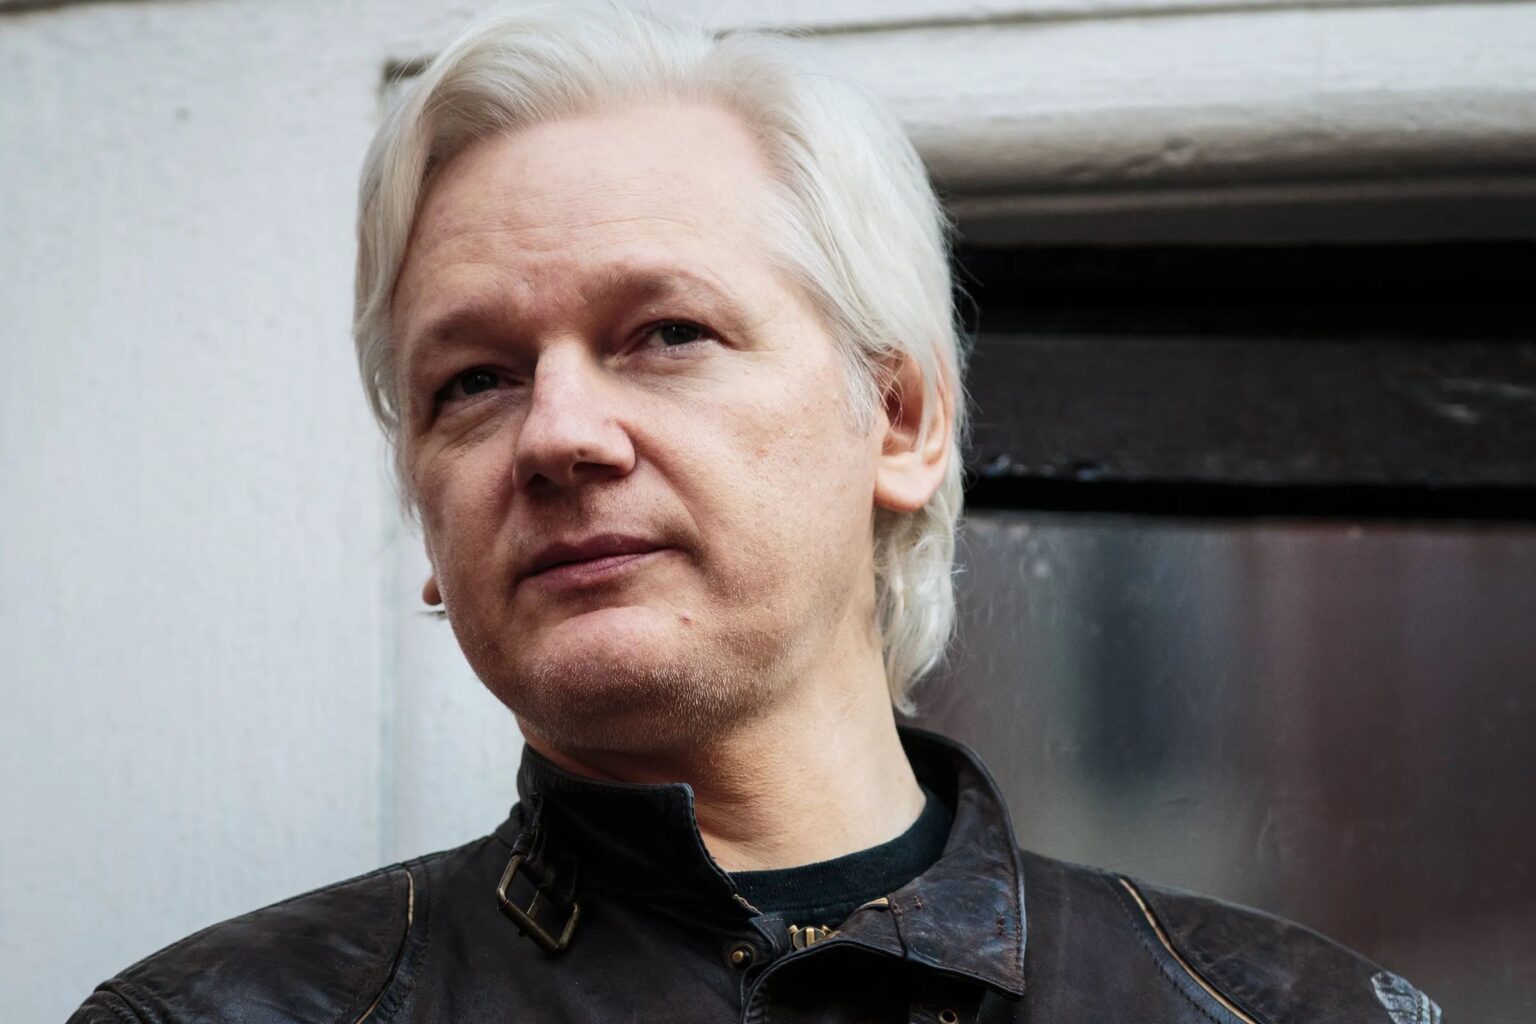 Why hasn't mainstream media been covering the arrest of Julian Assange? Find out if professional jealousy has been keeping the story buried.